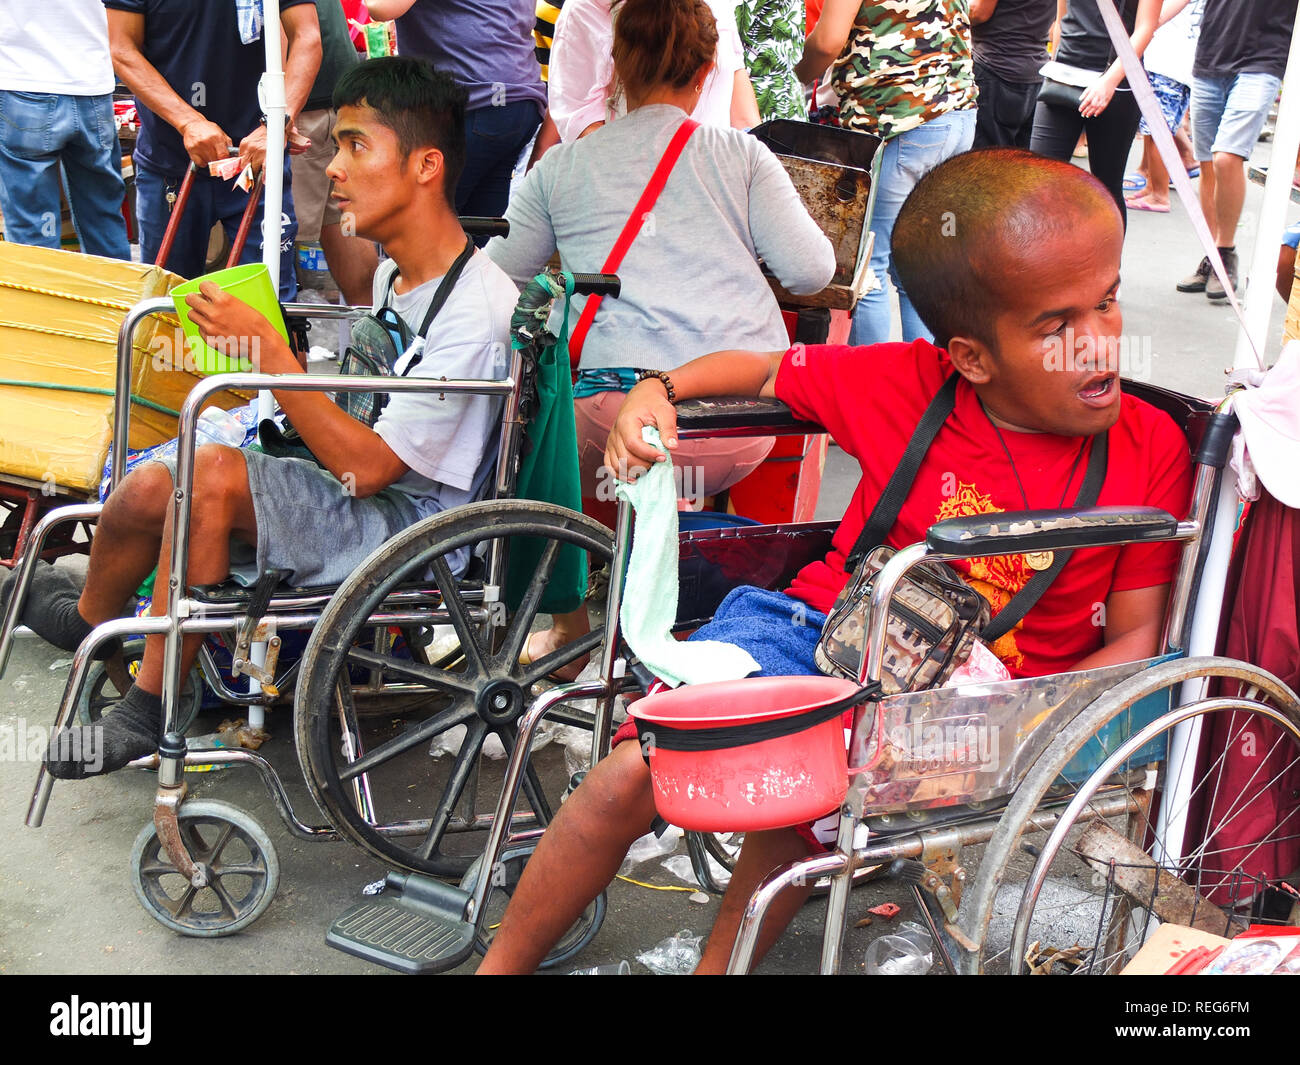 Persons with disabilities asking for alms were seen outside the Tondo Church during the Feast of the Sto. Niños in Tondo. Catholic Devotees bring their Sto. Niños to be blessed by holy water by the parish priest of Tondo church to celebrate the Feast of the Santo Niño (Child Jesus). Stock Photo